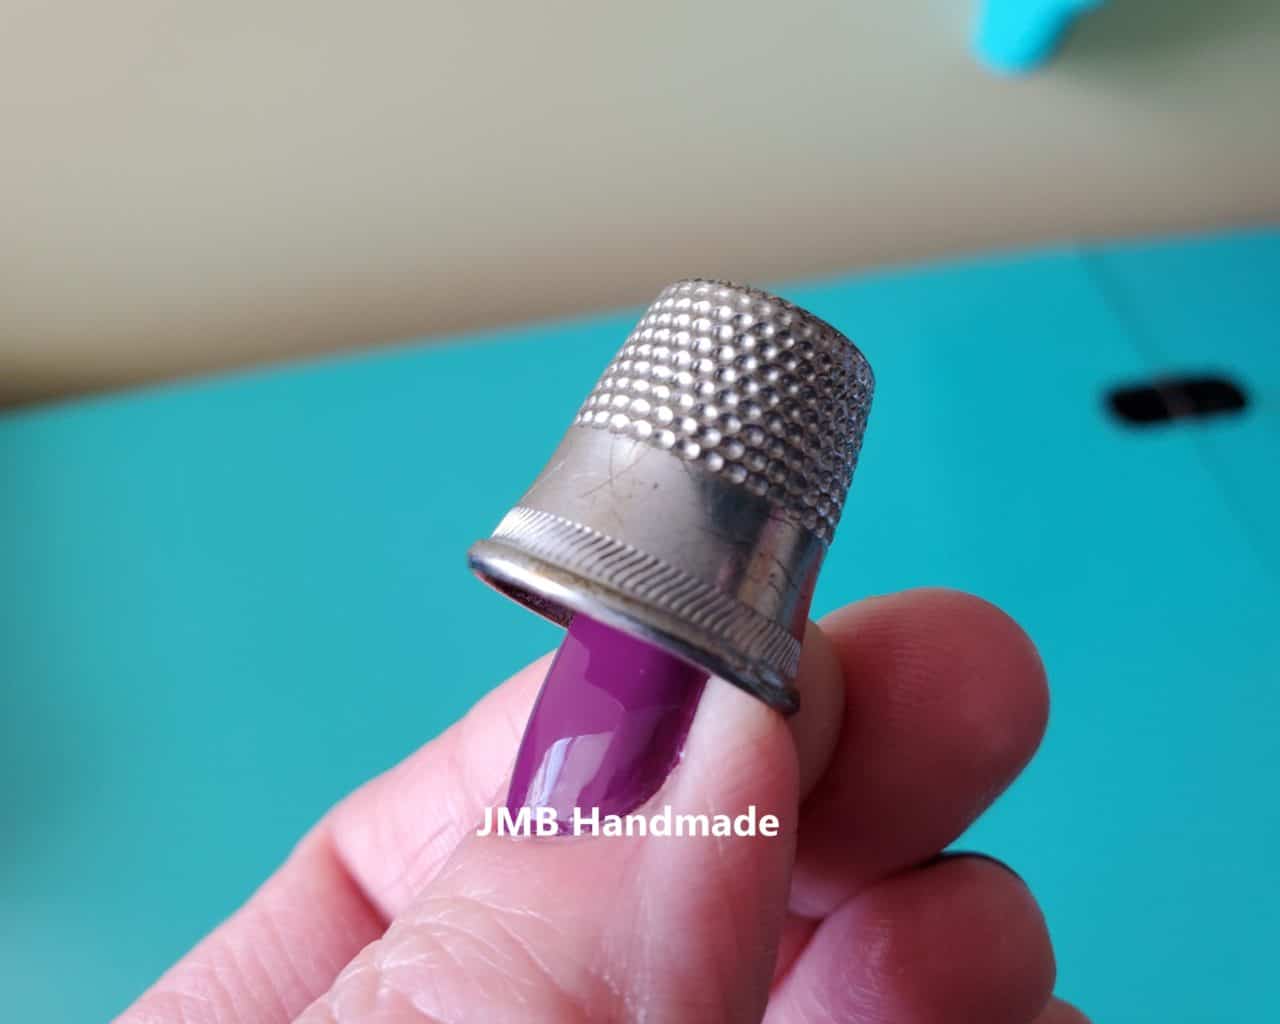 Add a thimble to your sewing studio supplies